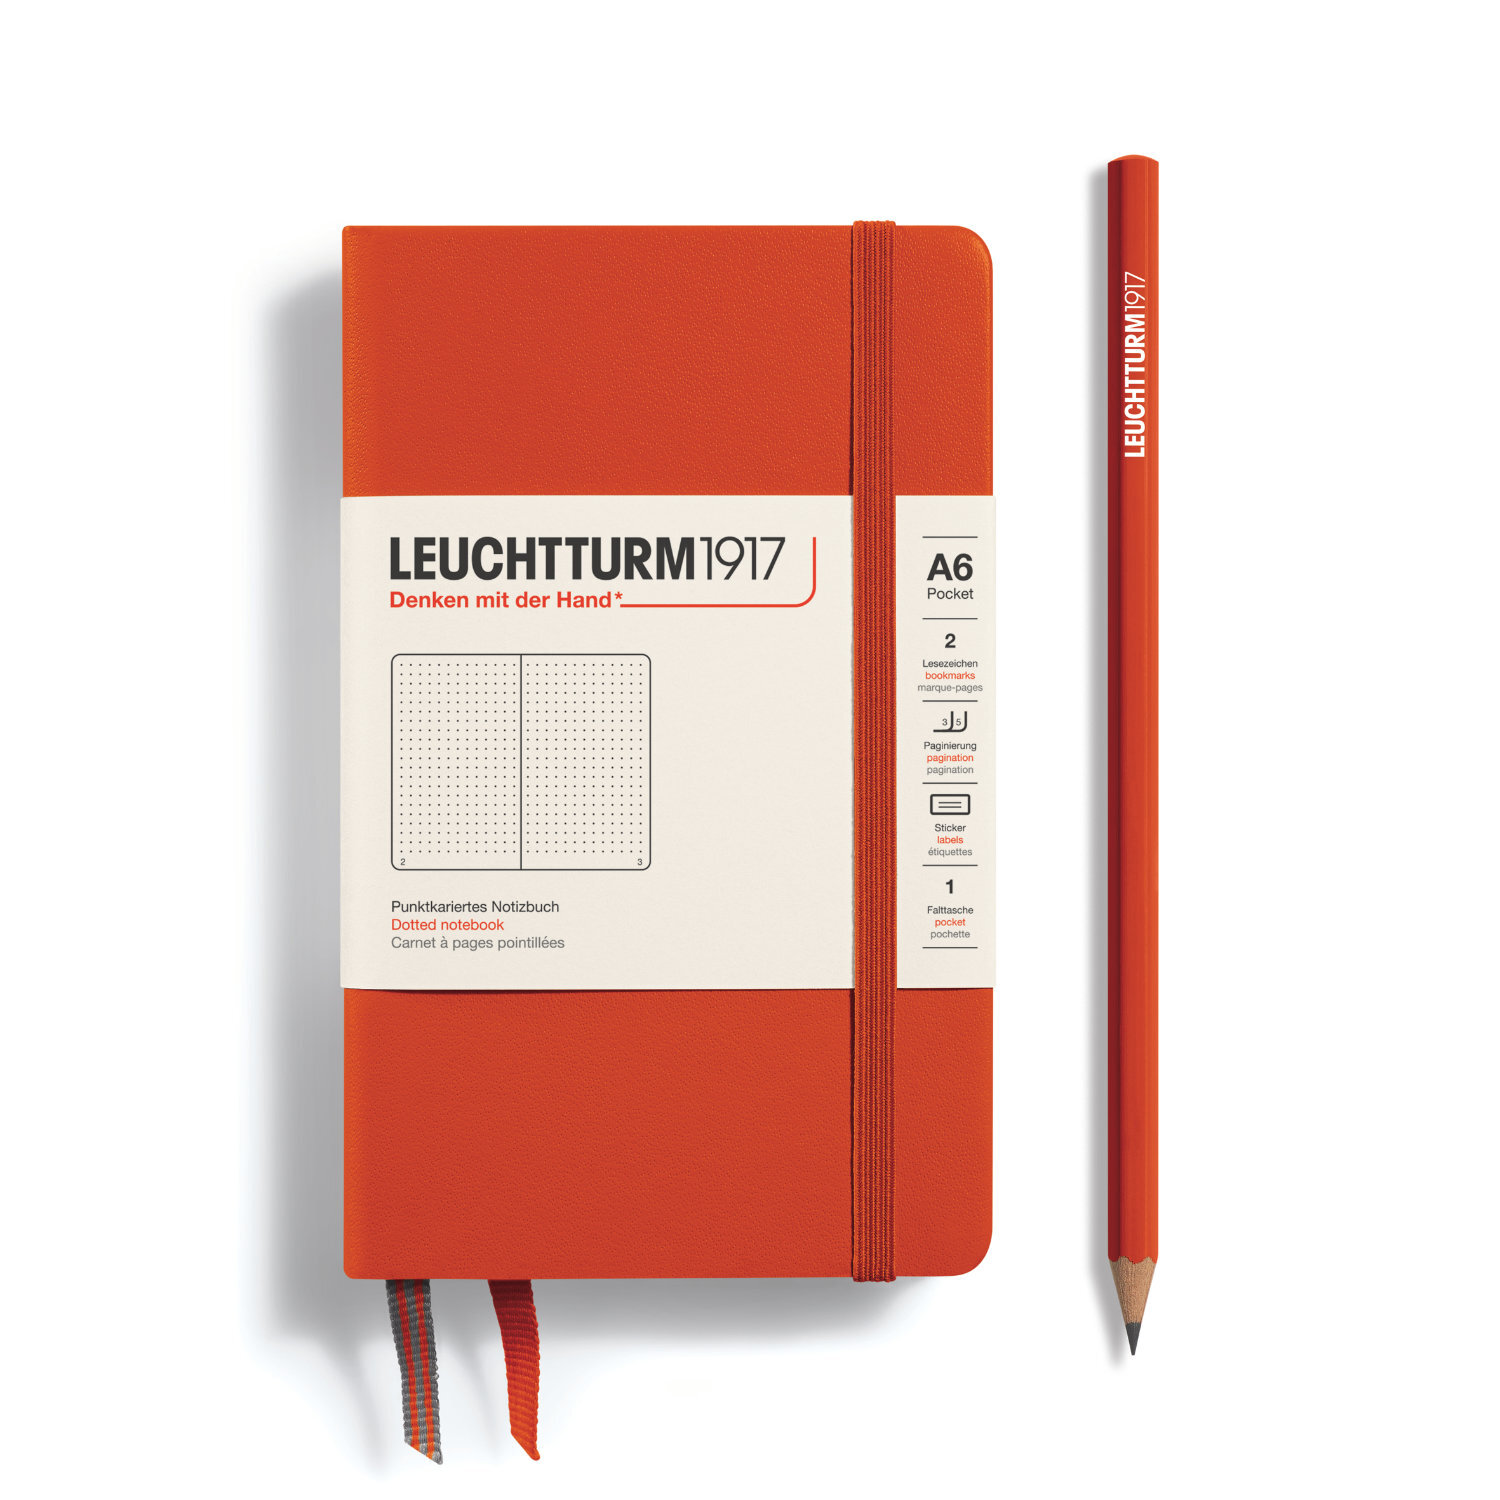 Notizbuch Pocket dotted Hardcover A6